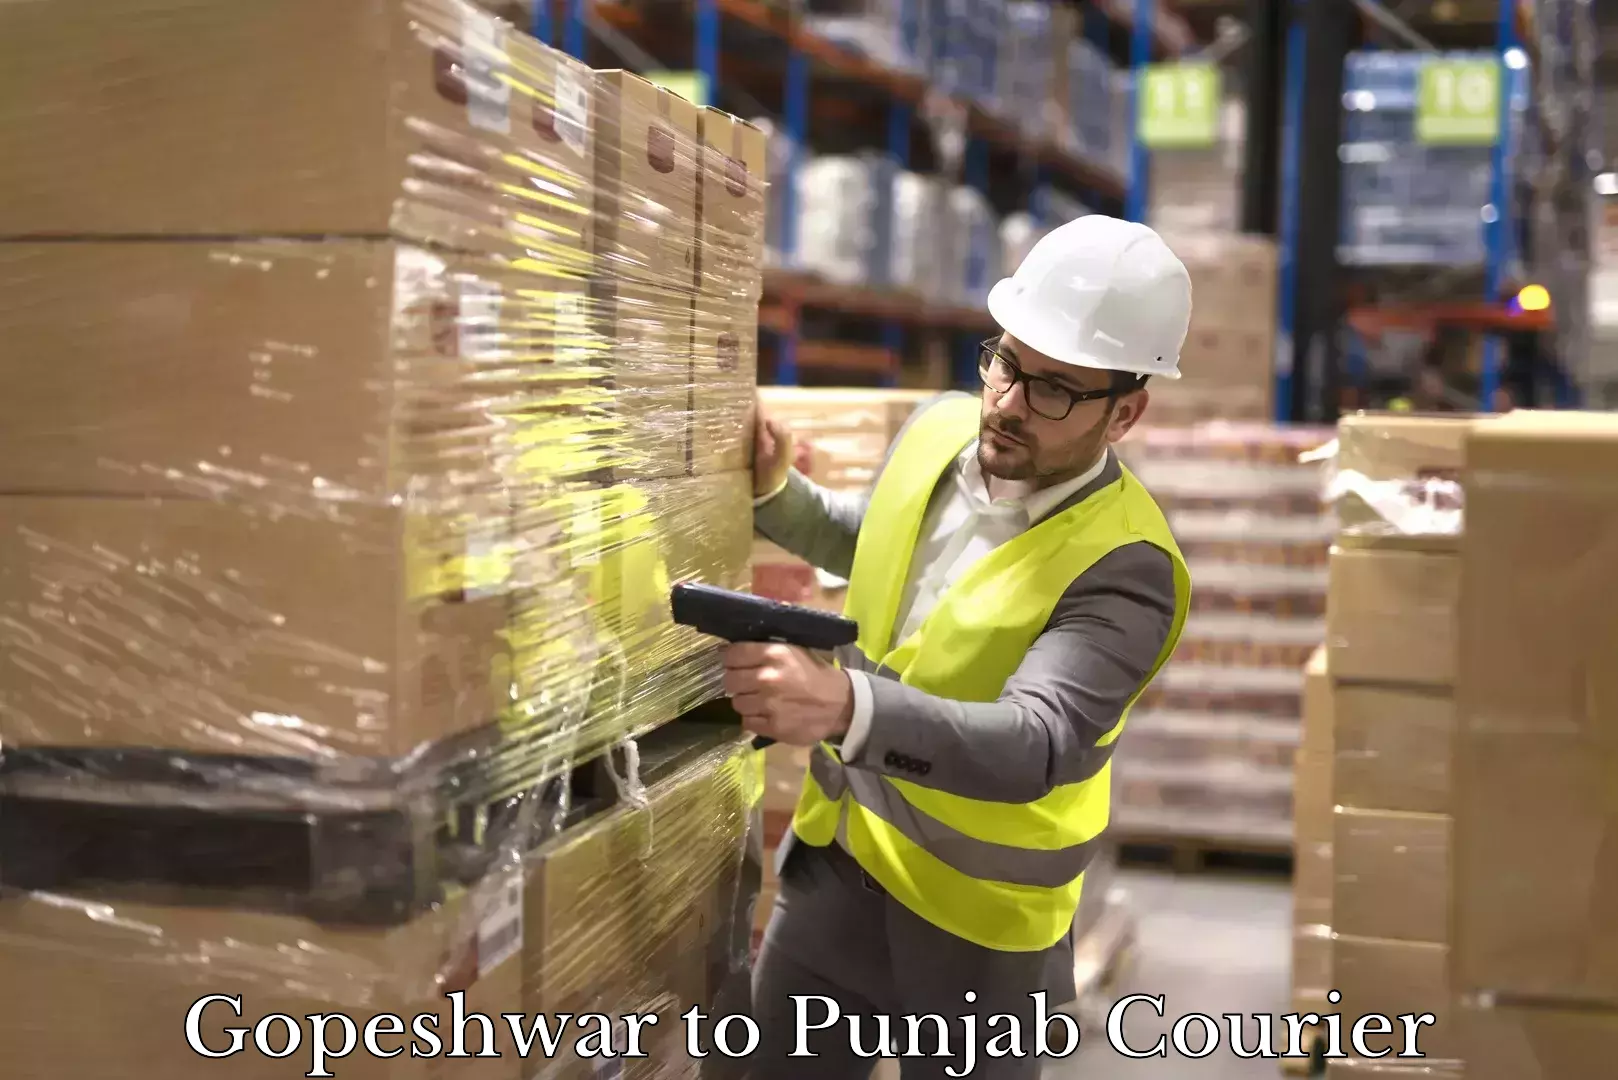 Local delivery service Gopeshwar to Punjab